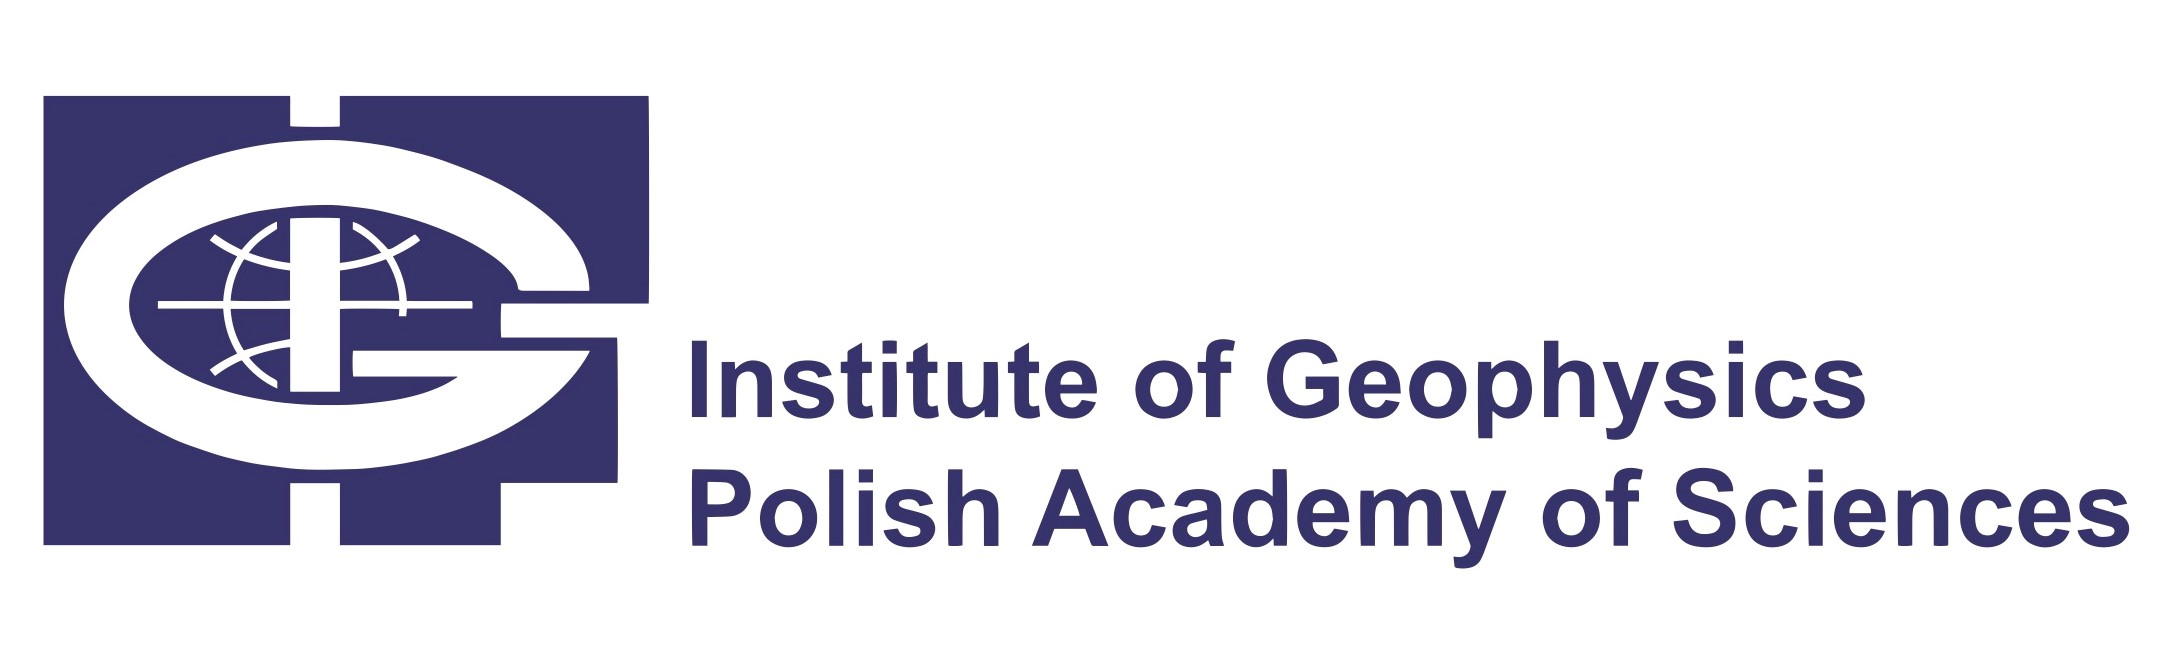 The logo of the Institute of Geophysics PAS redirecting to its webpage.